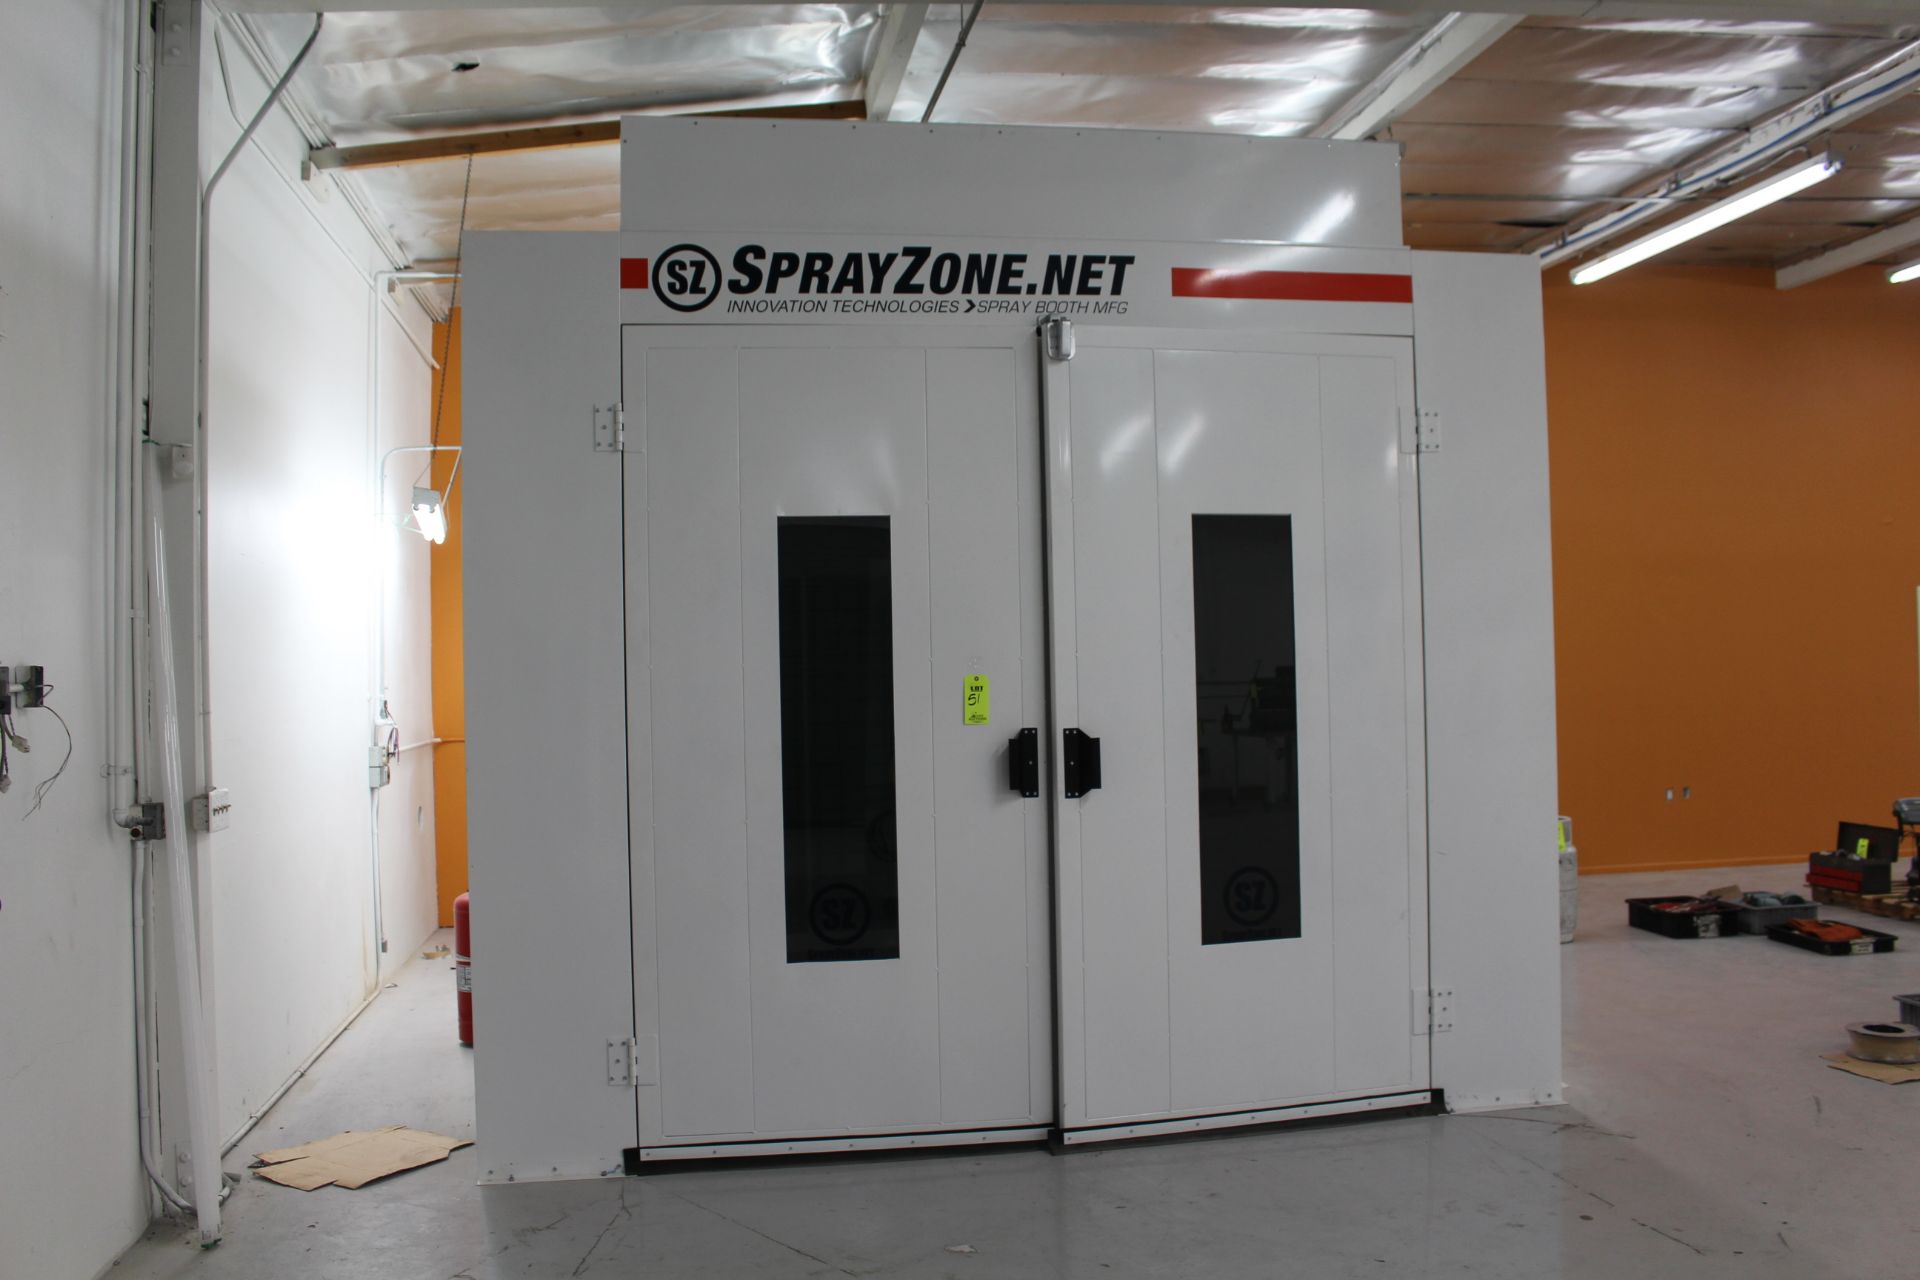 SPRAY ZONE PAINT SPRAY BOOTH, BRAND NEW, 169" LONG X 143" WIDE INSIDE DIMENSION - Image 3 of 15